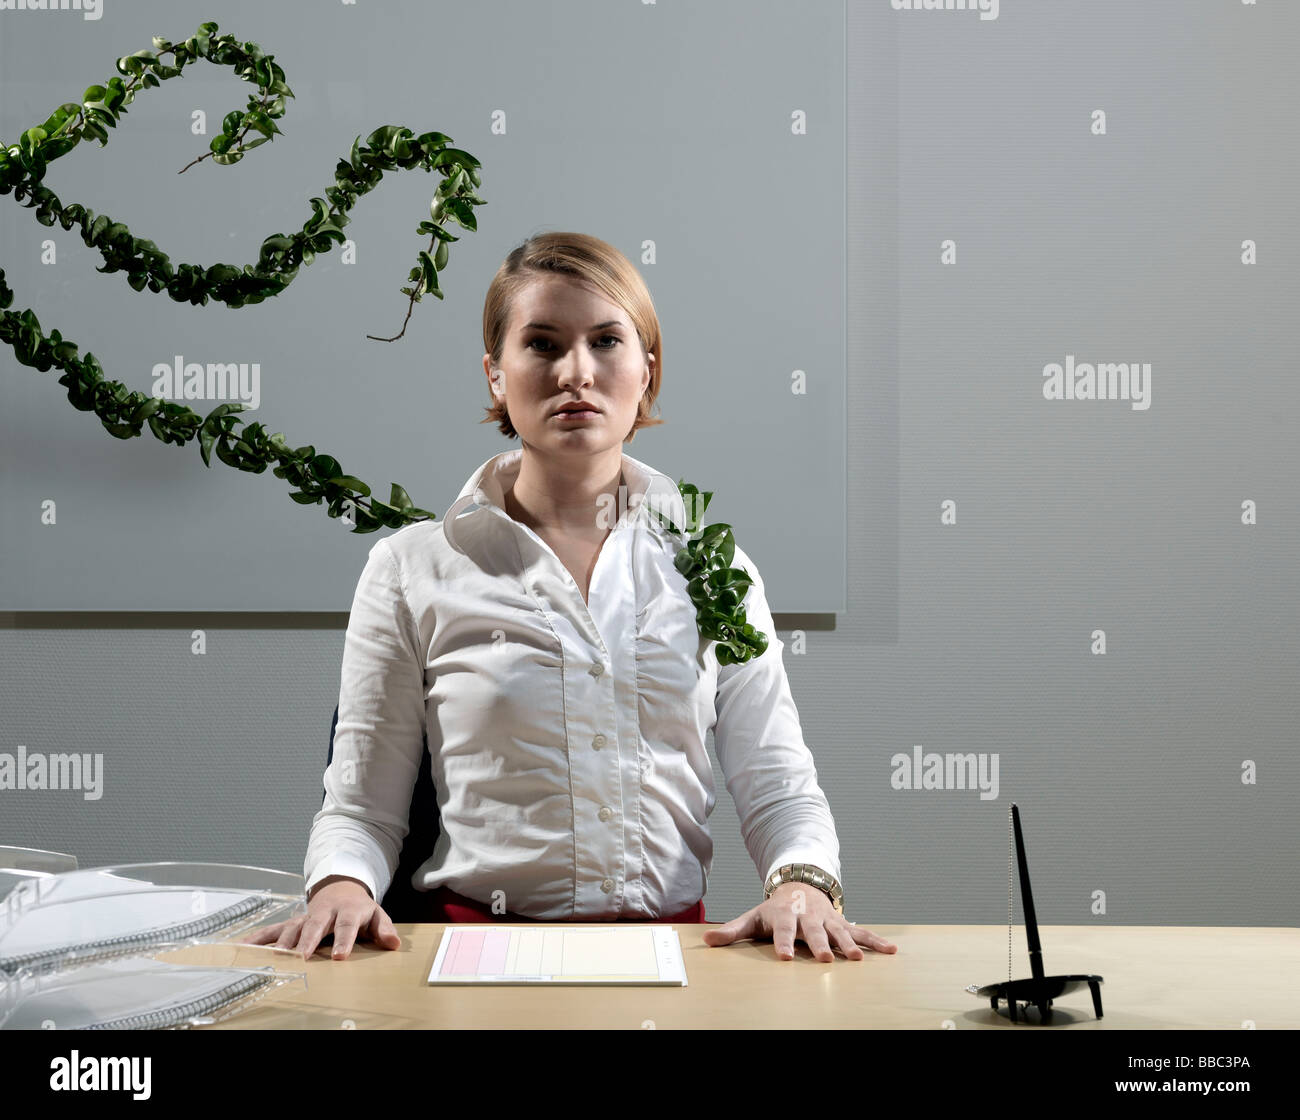 Woman by desk beeing attacked by plants Stock Photo